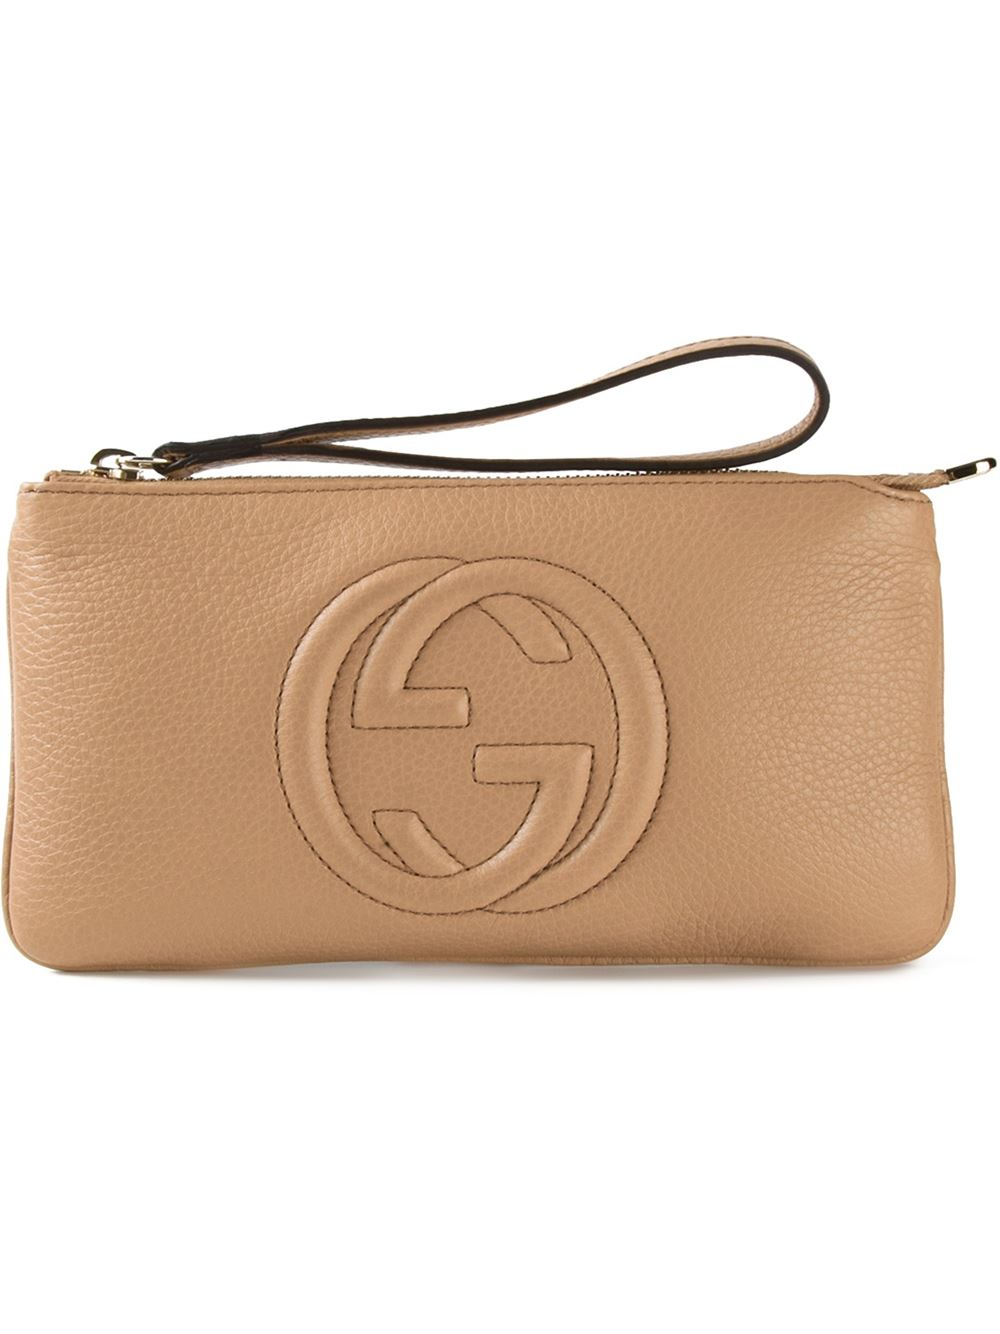 Gucci Small 'soho' Clutch in Natural - Lyst